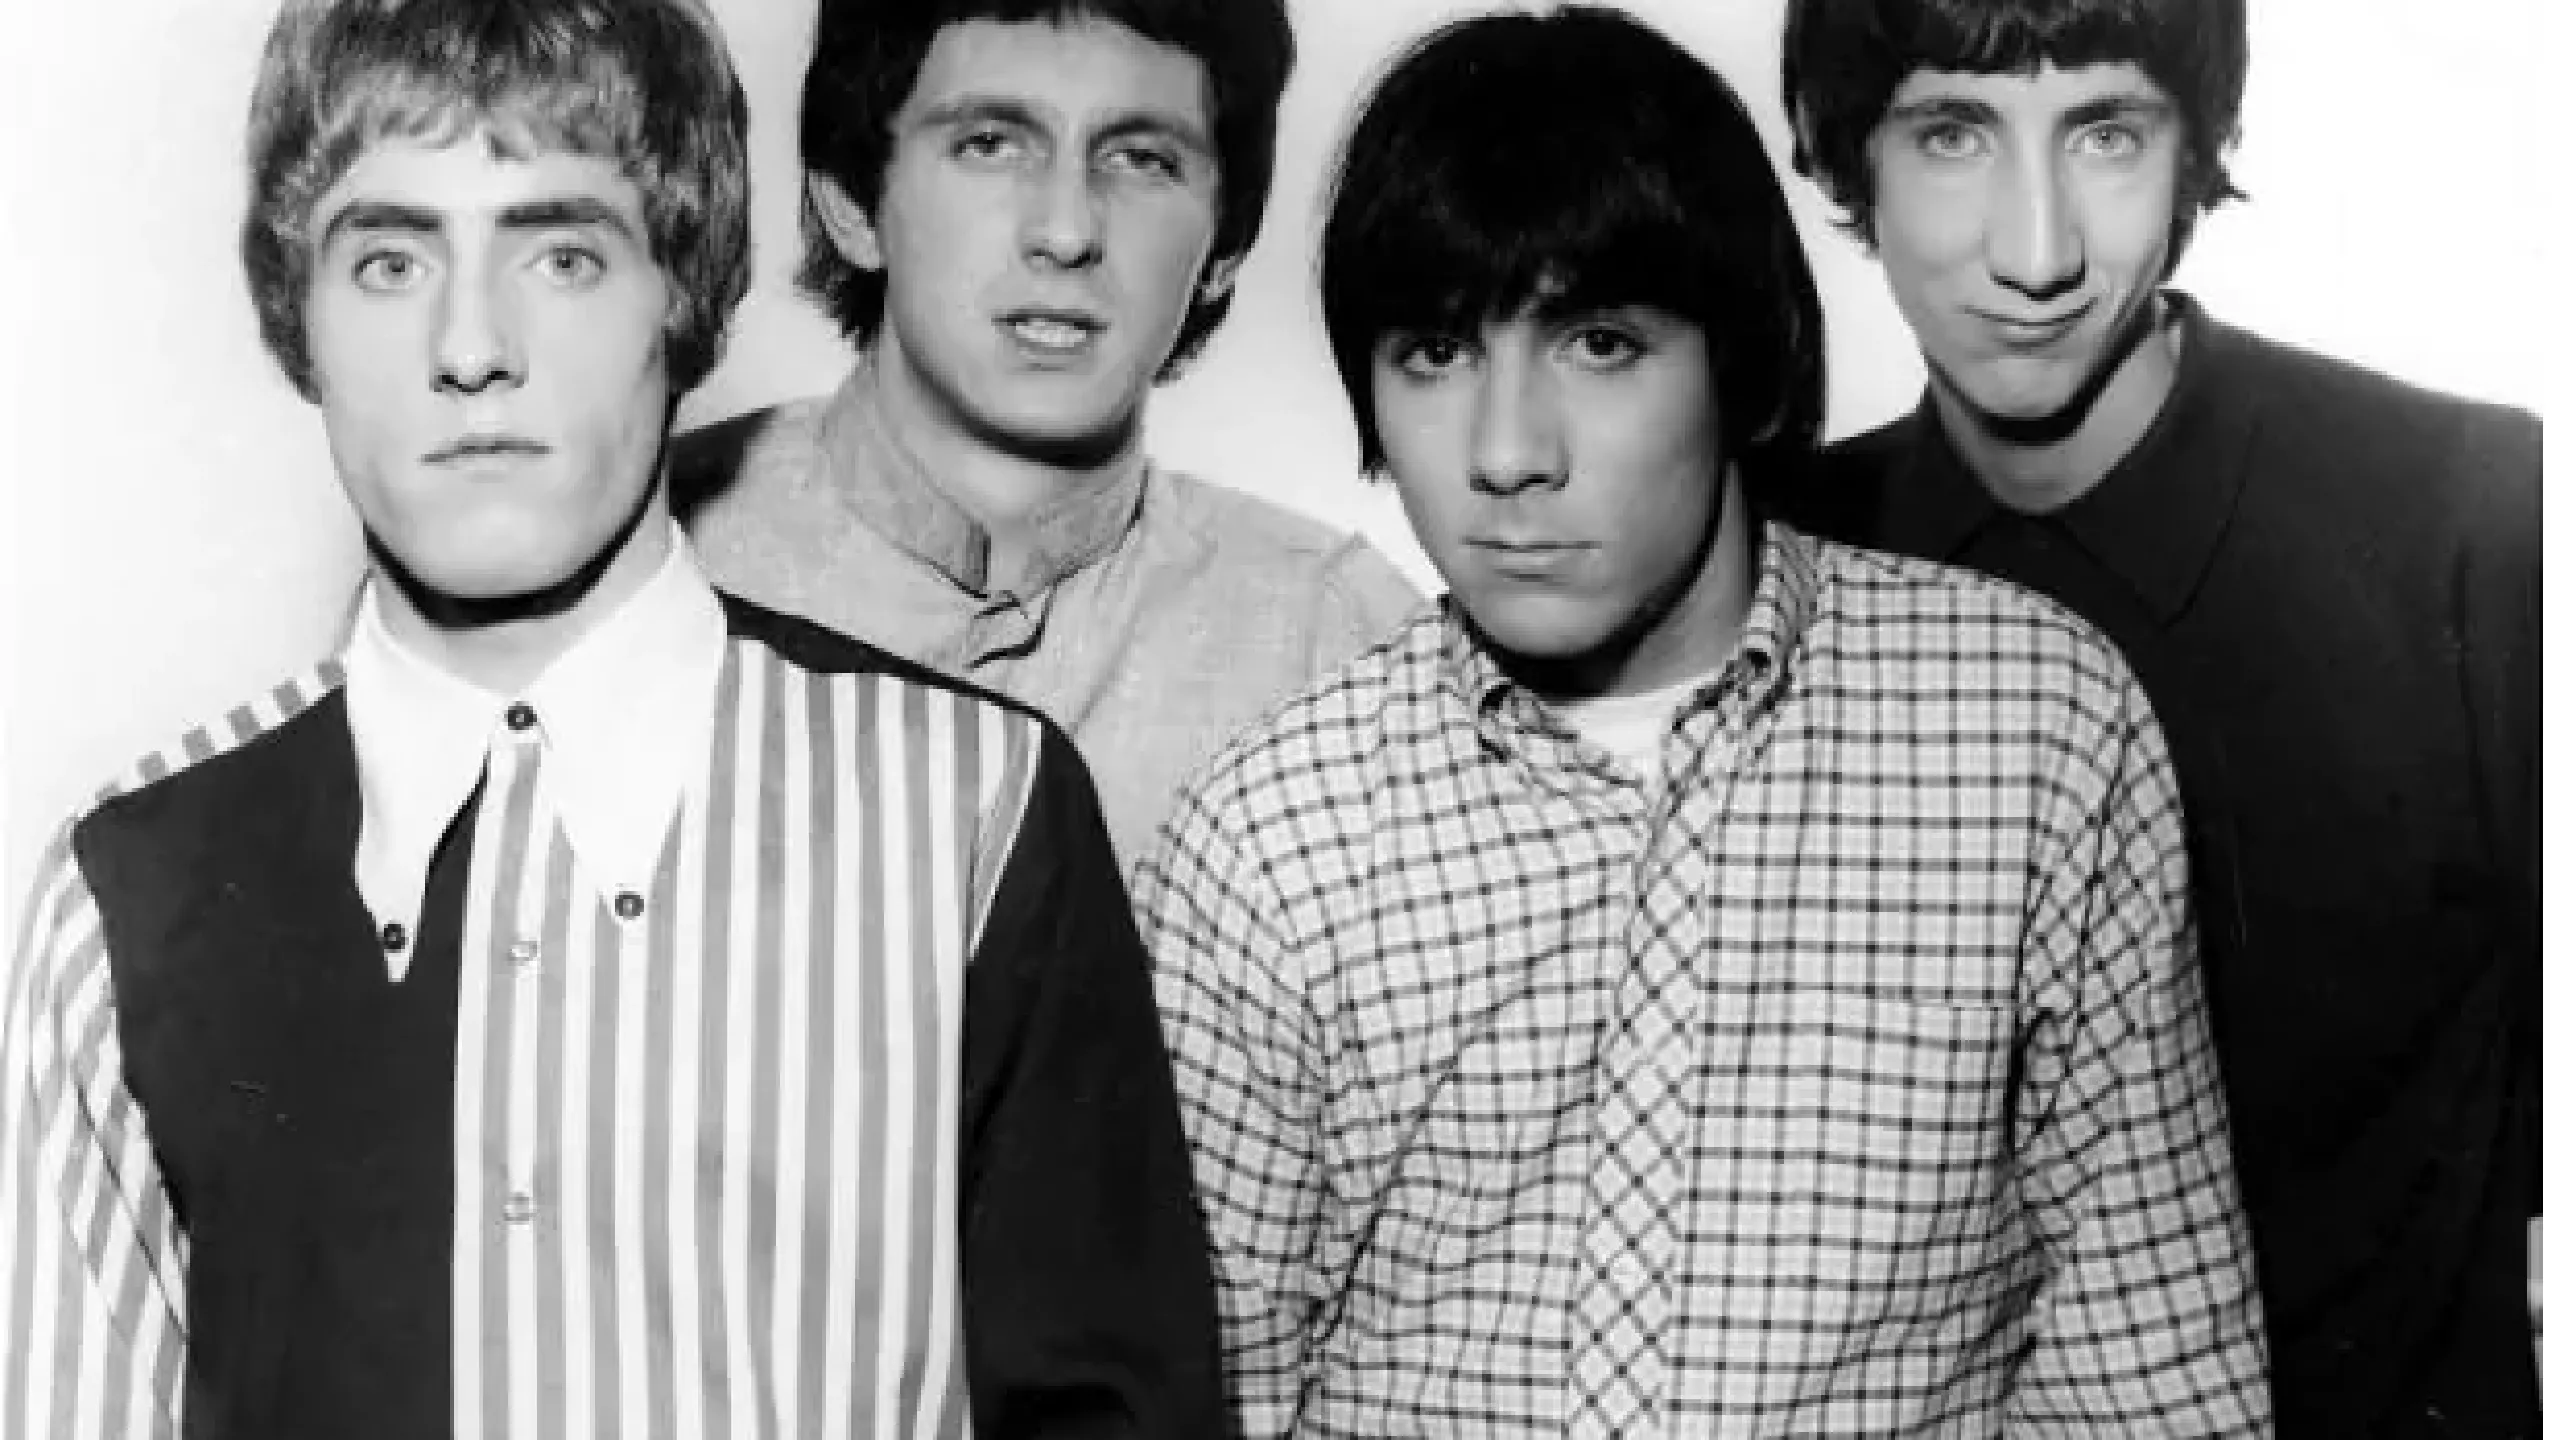 The who collection the who. The who 1967. Солист группы the who. The who 2022. The who обложки.